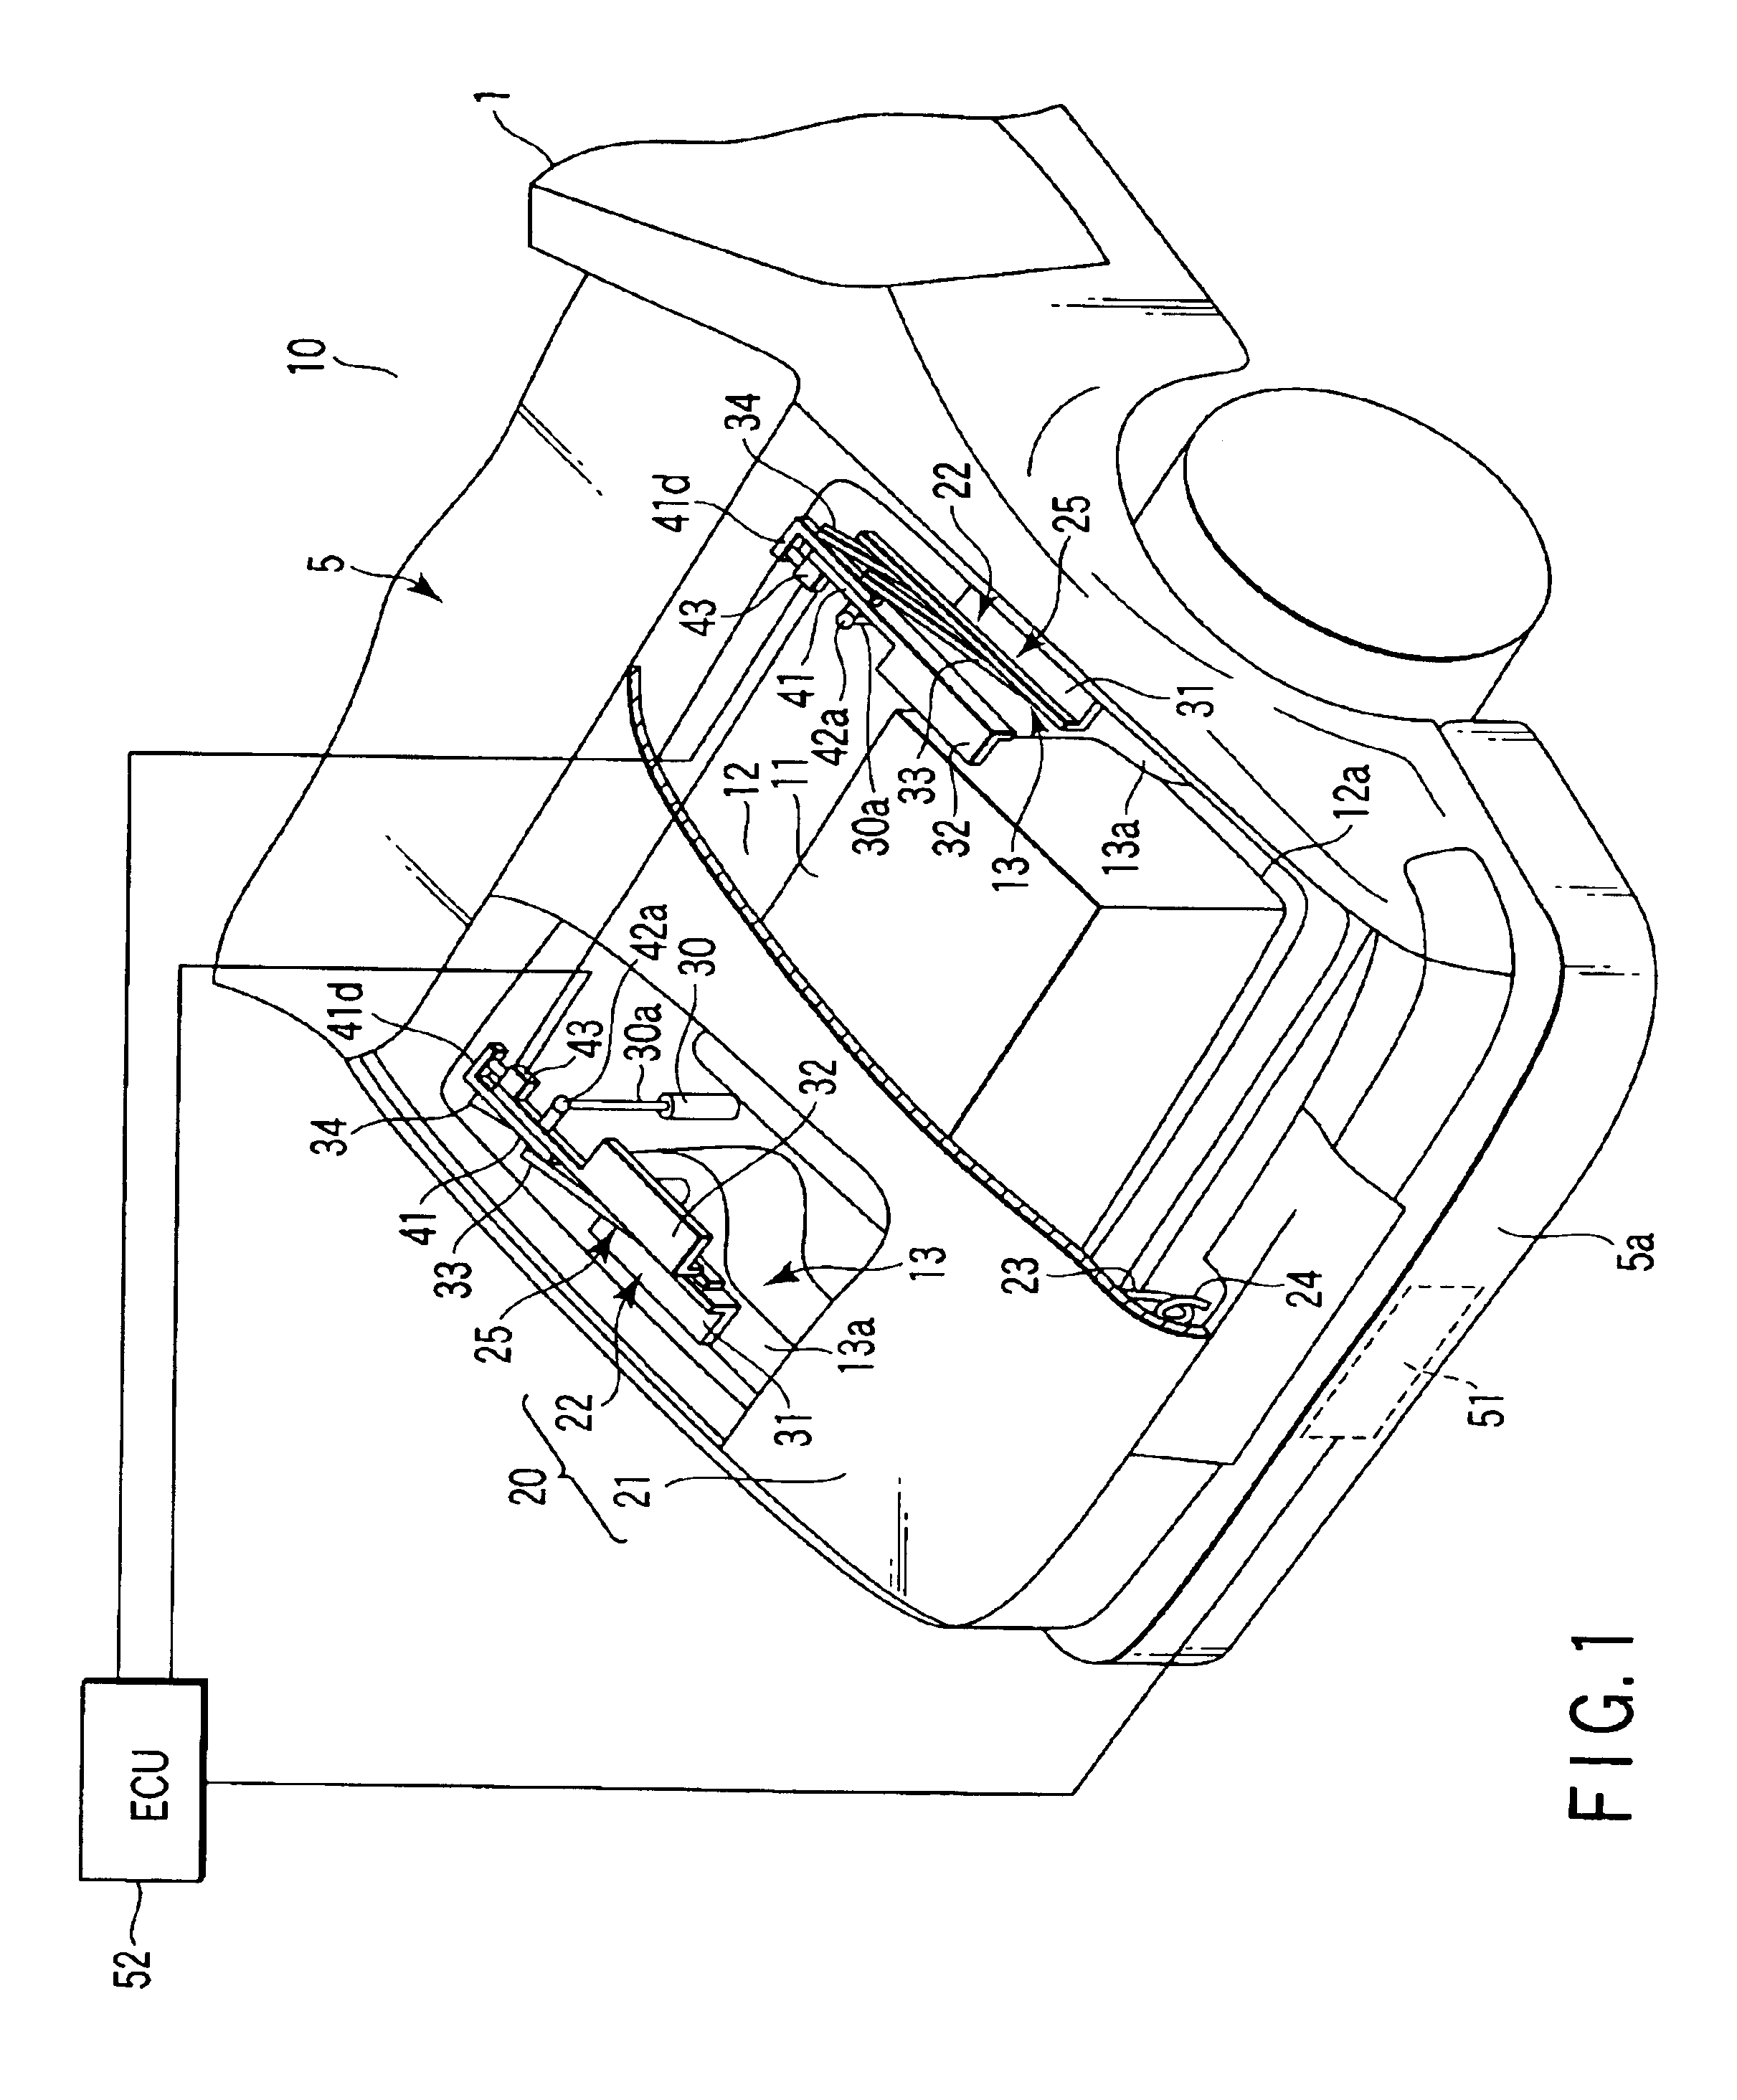 Hood apparatus for a vehicle